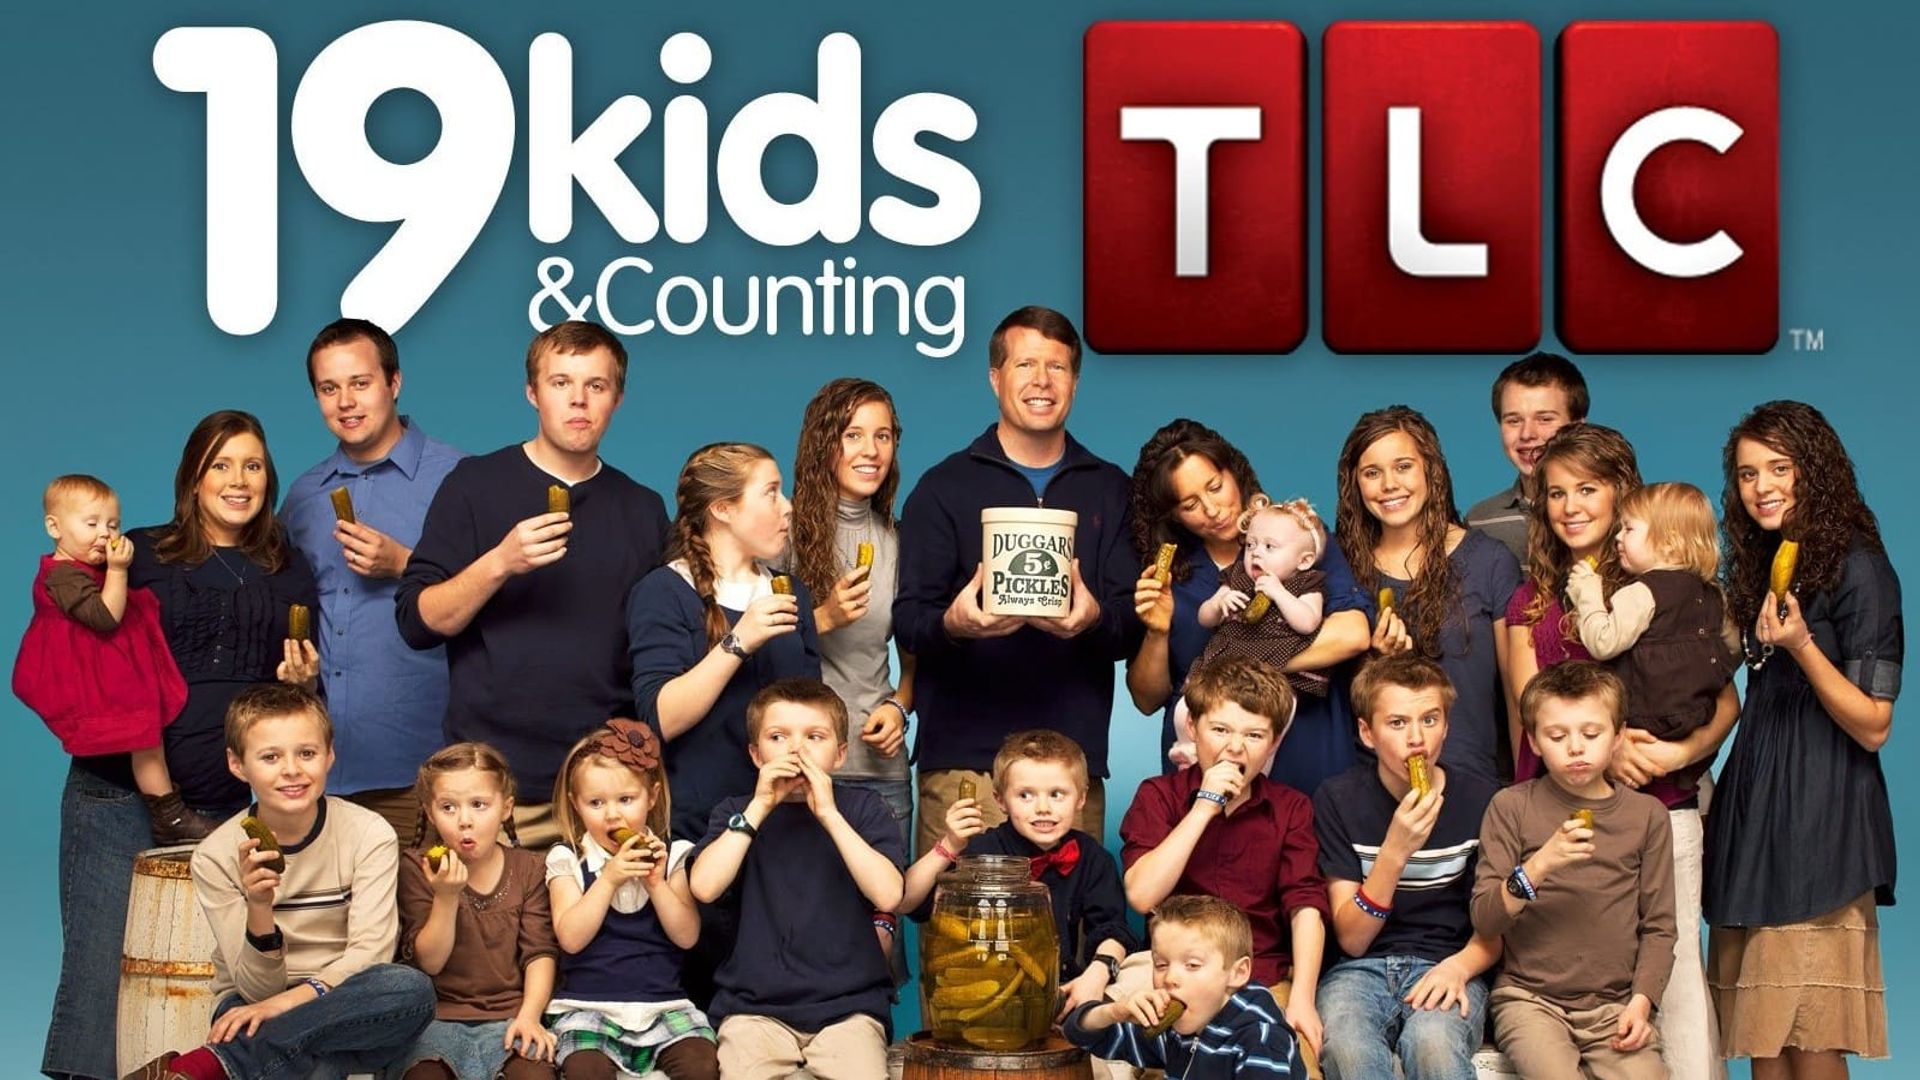 17 Kids and Counting background